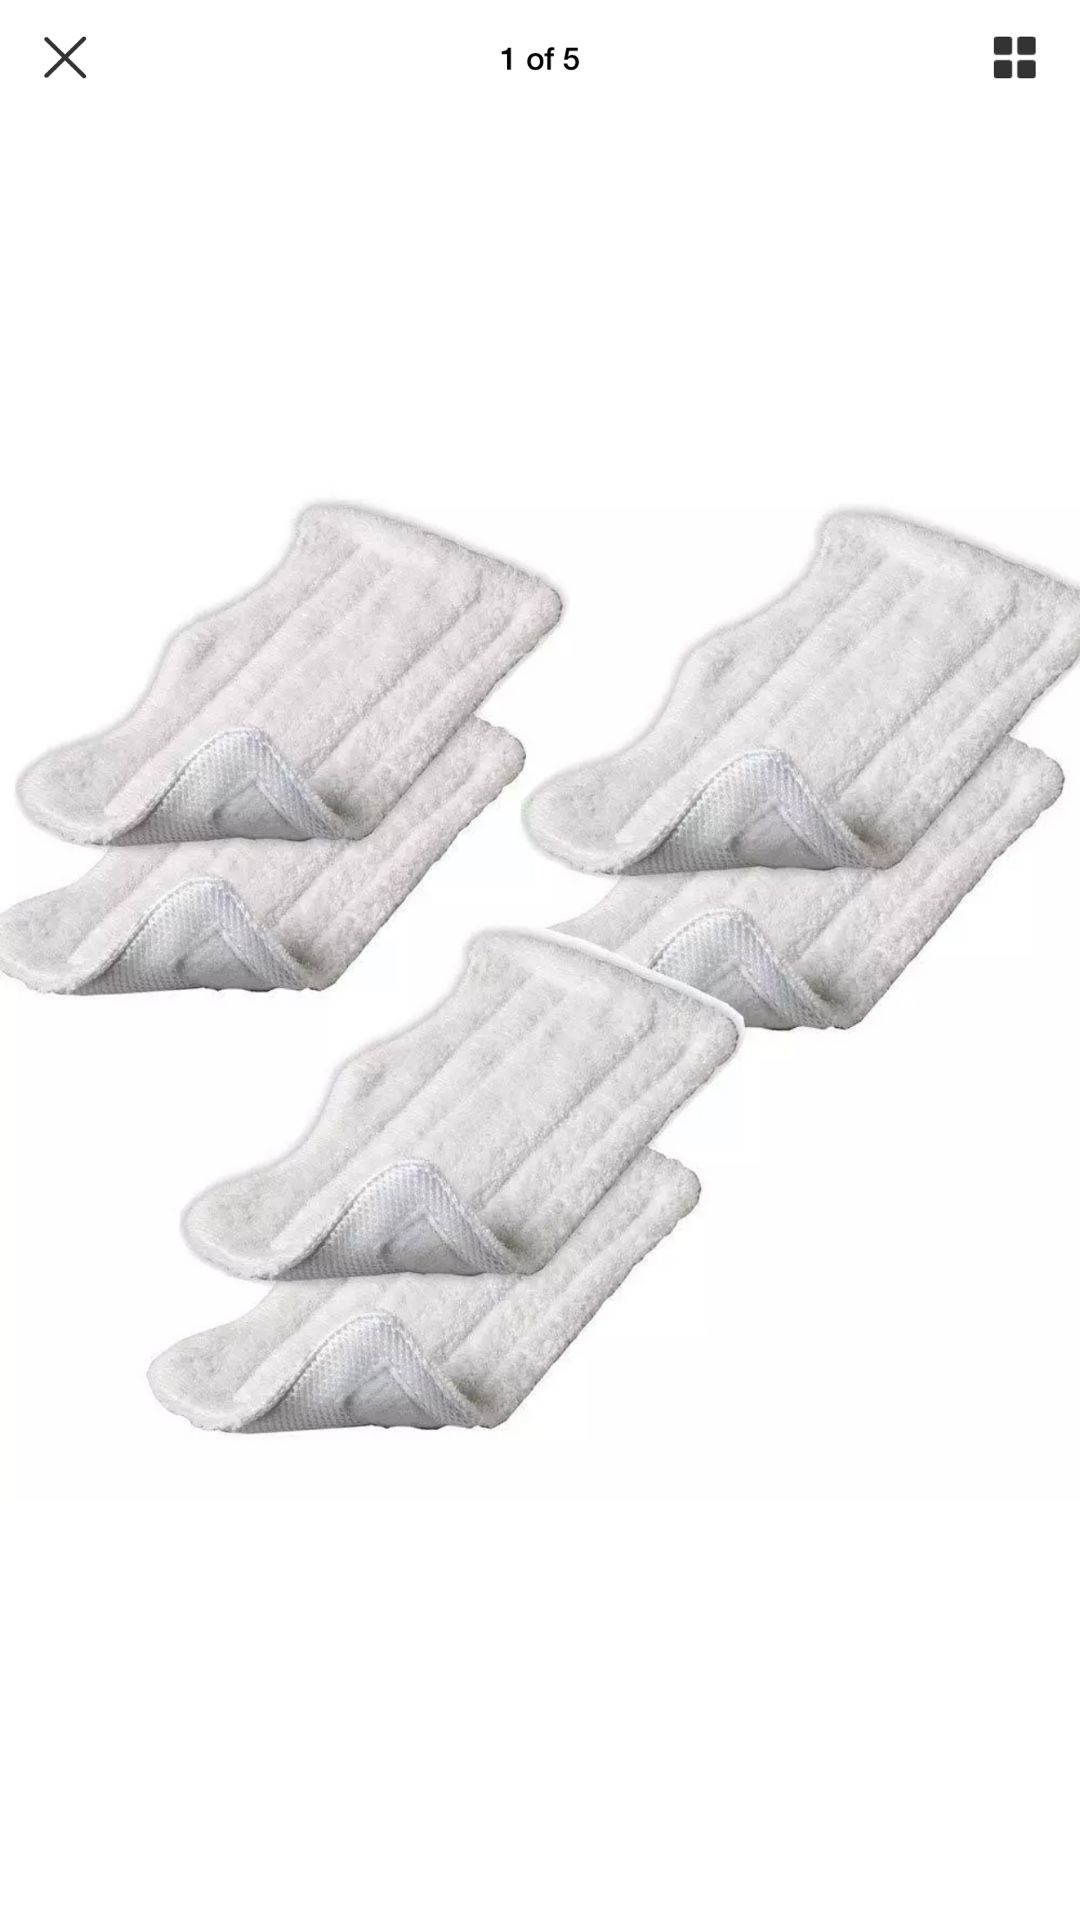 Amariver Microfiber Replacement Pads for Shark Steam Euro-Pro Mop (Set of 6)